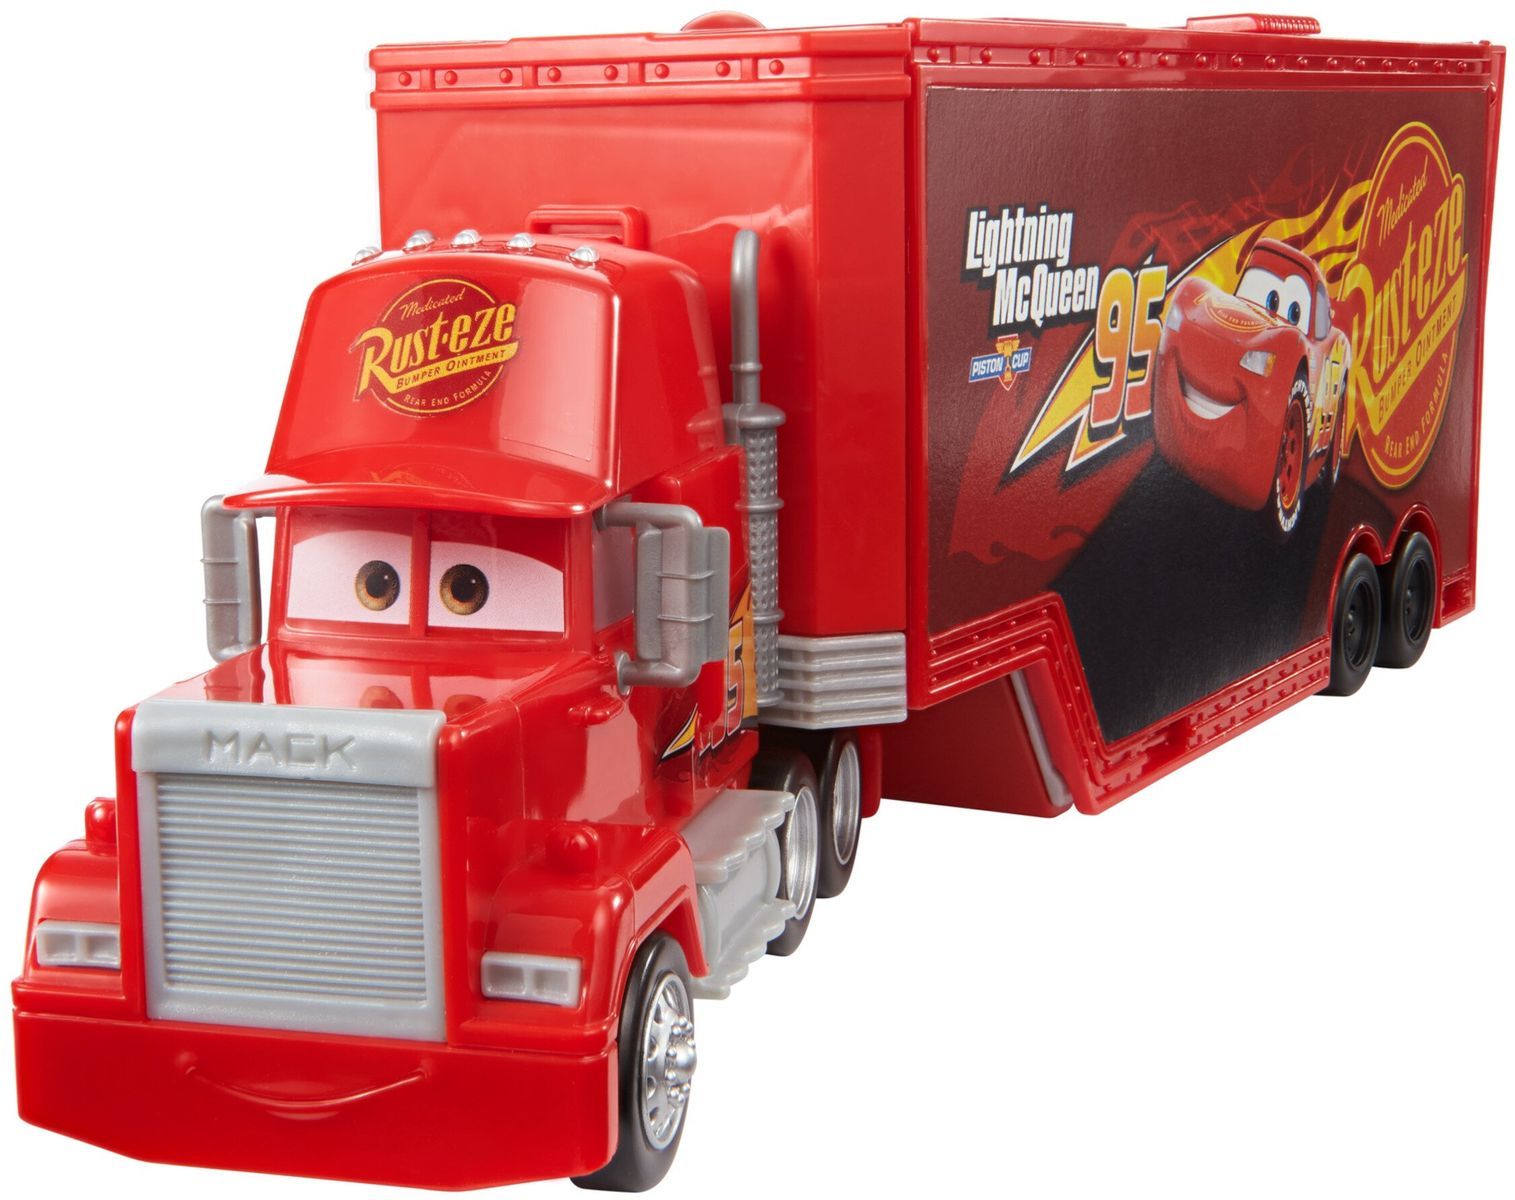 [RDY] [送料無料] Disney and Pixar Cars Transforming Mack Playset, 2-in-1 toy Truck &amp; Tune-Up Station ディズニー＆ピクサー カーズ トランスフォーミング マック プレイセット [楽天海外通販] | Disney and Pixar Cars